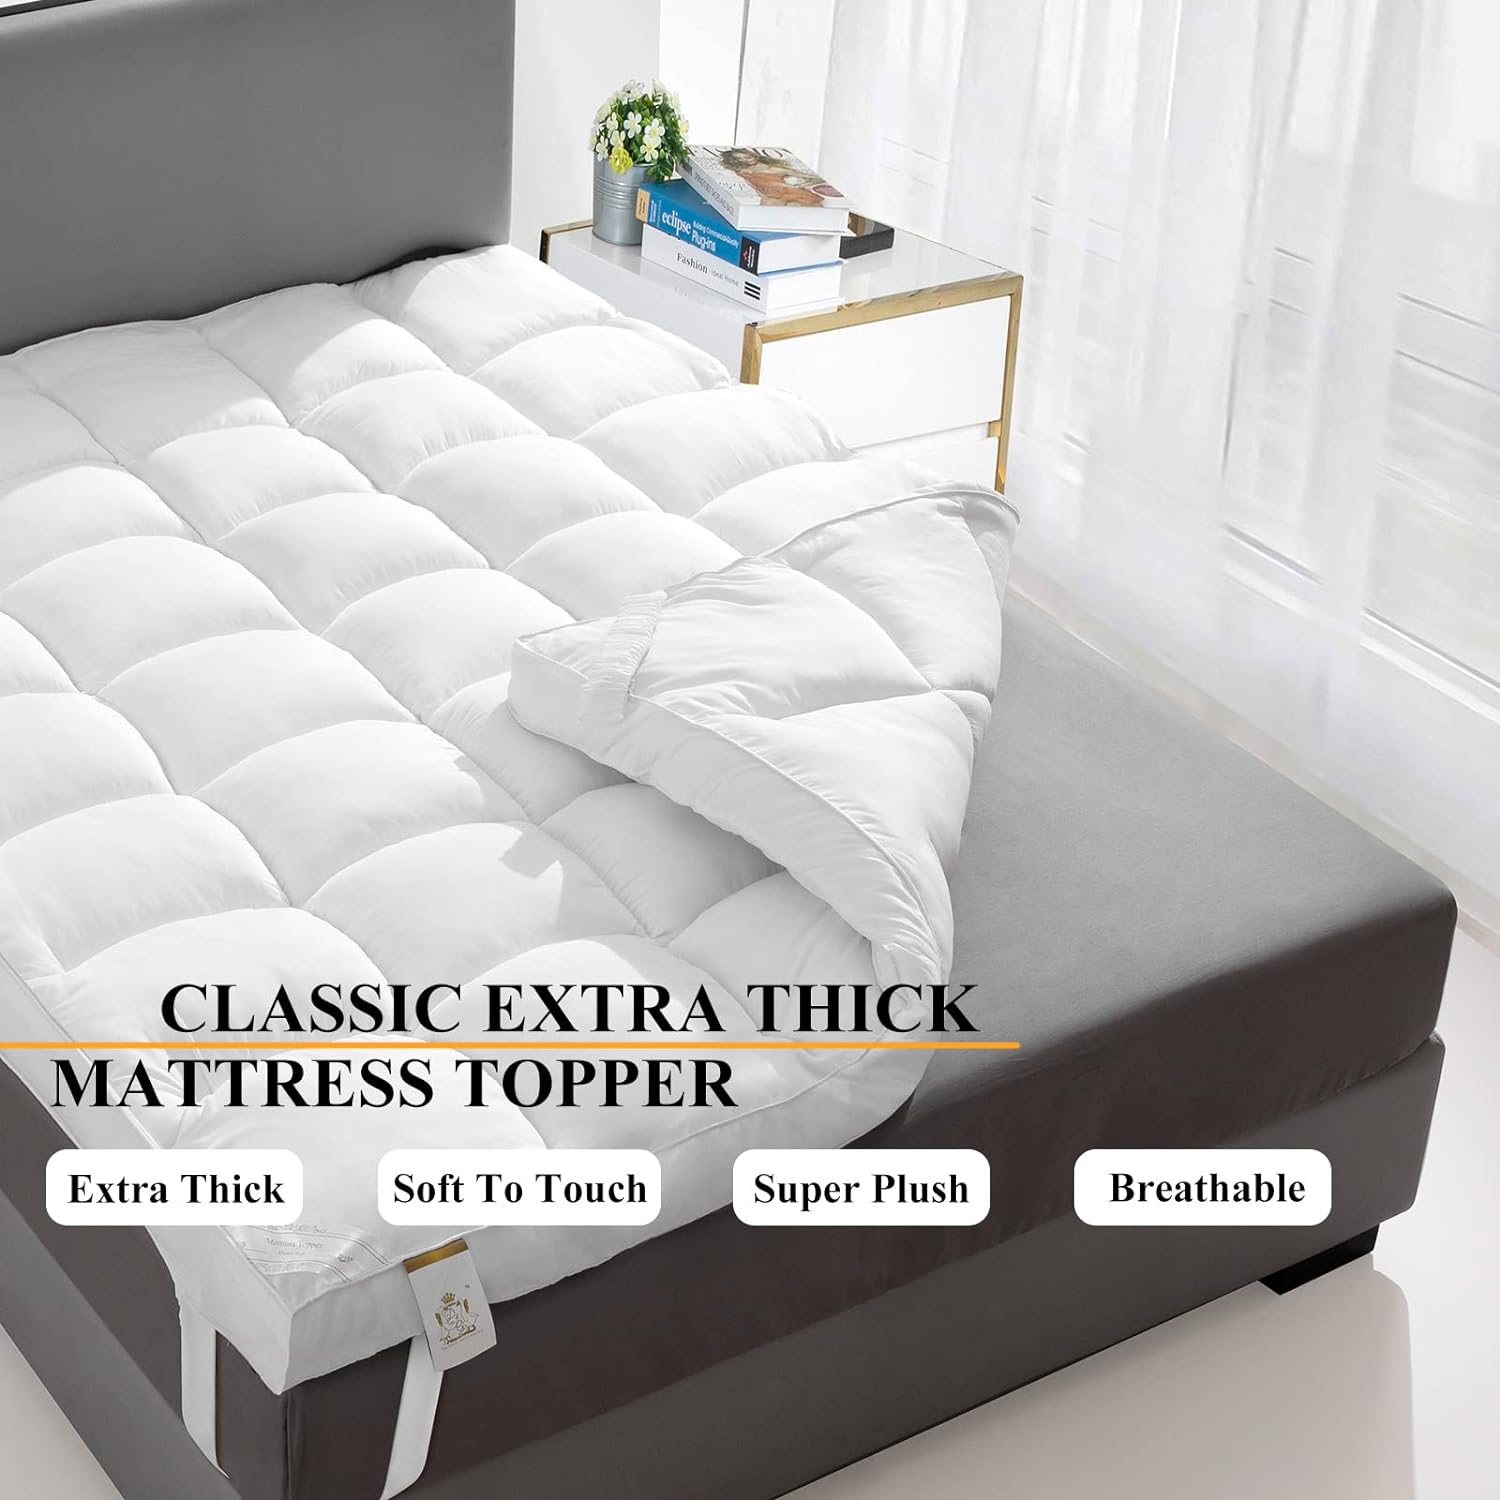 Extra Thick Twin Mattress Topper for Softening Firm Mattress, Overfilled Pillow Top Bed Topper for Cloud-Like Sleep & Back Pain Relief, Cooling & Plush Mattress Pad Cover, Fit to 6-22Mattress